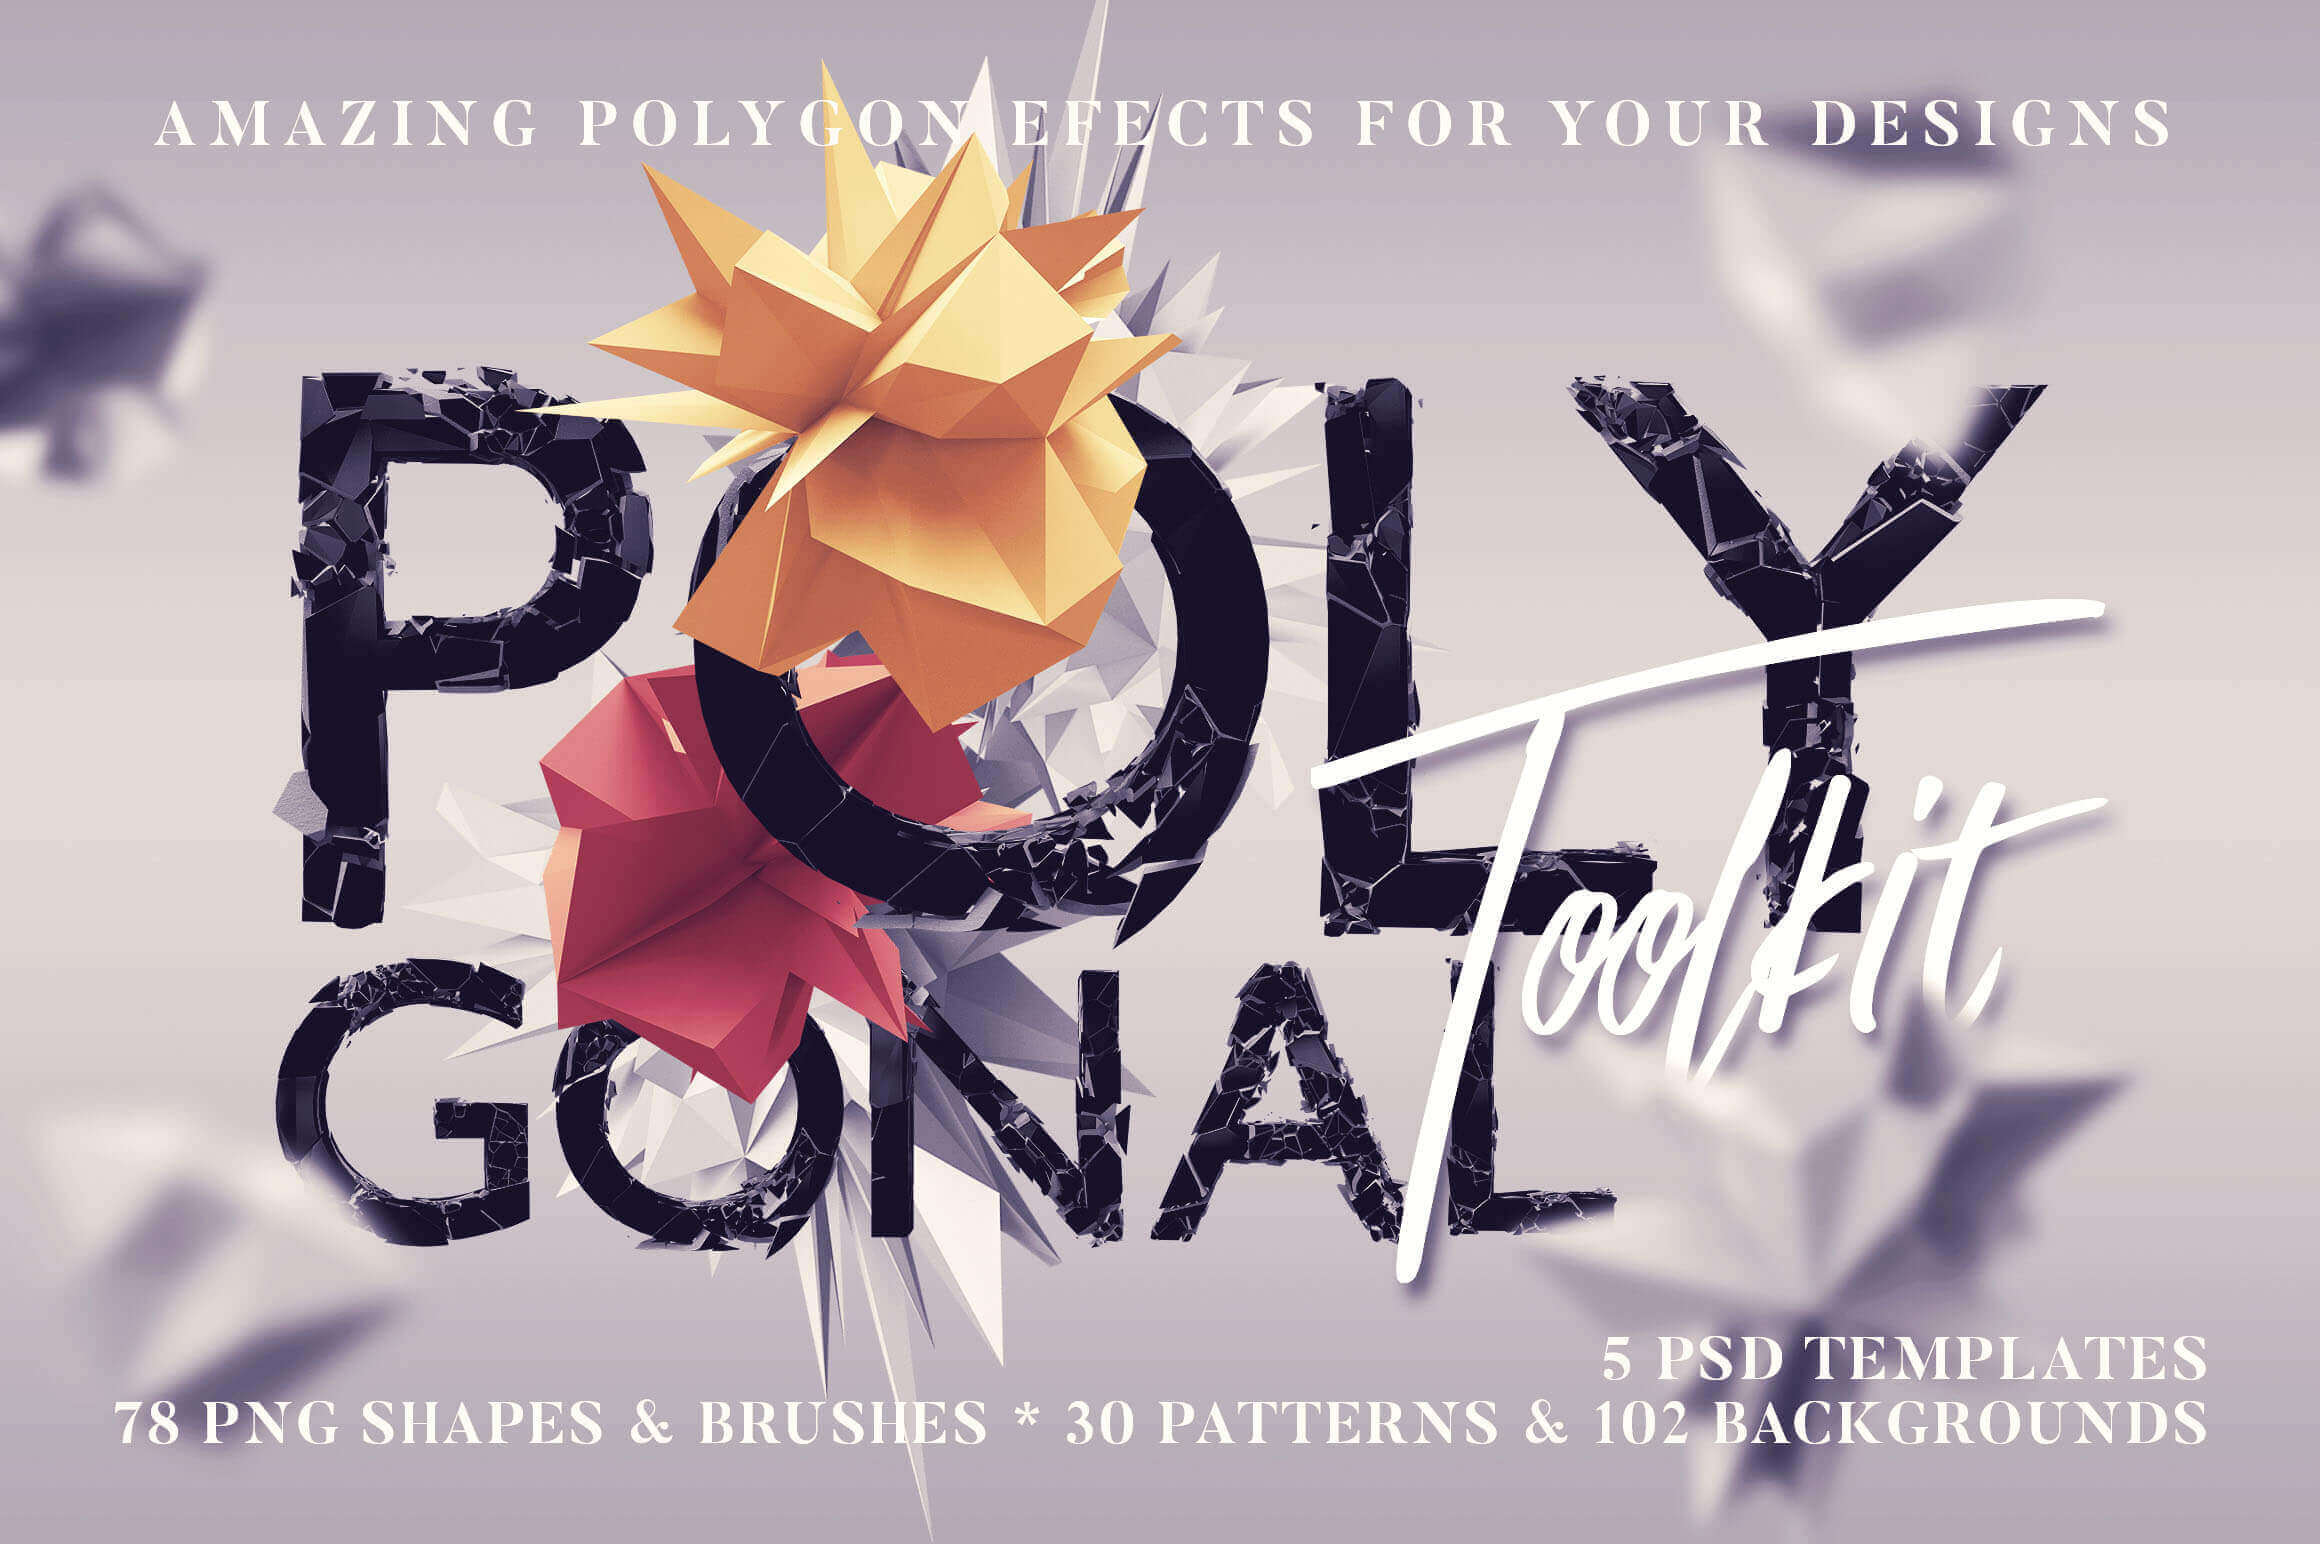 250+ Polygonal Shapes, Brushes, Backgrounds & Patterns – only $12!